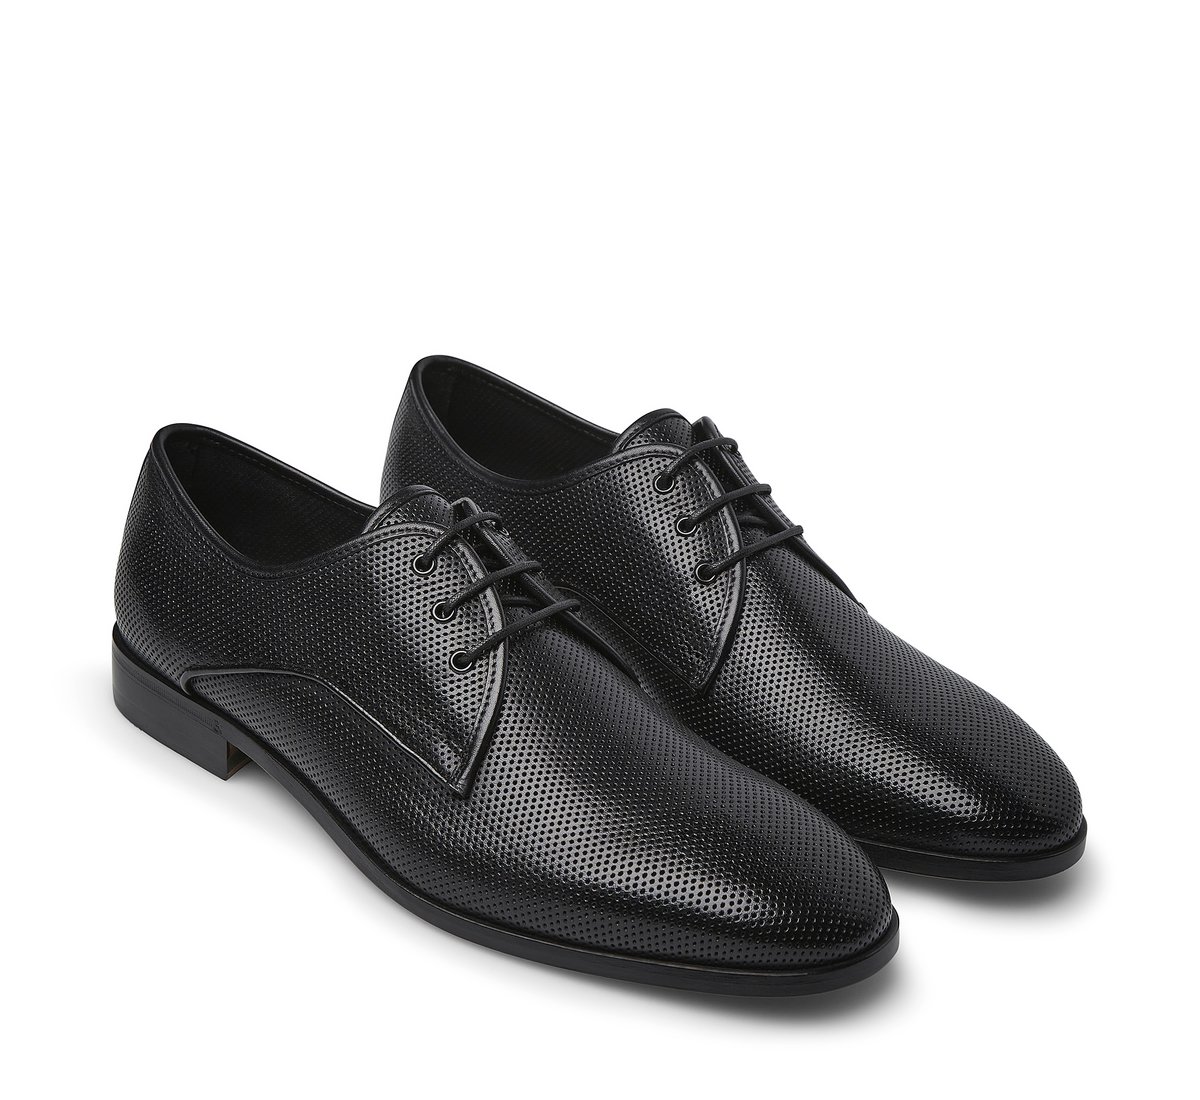 Perforated calfskin derby shoes